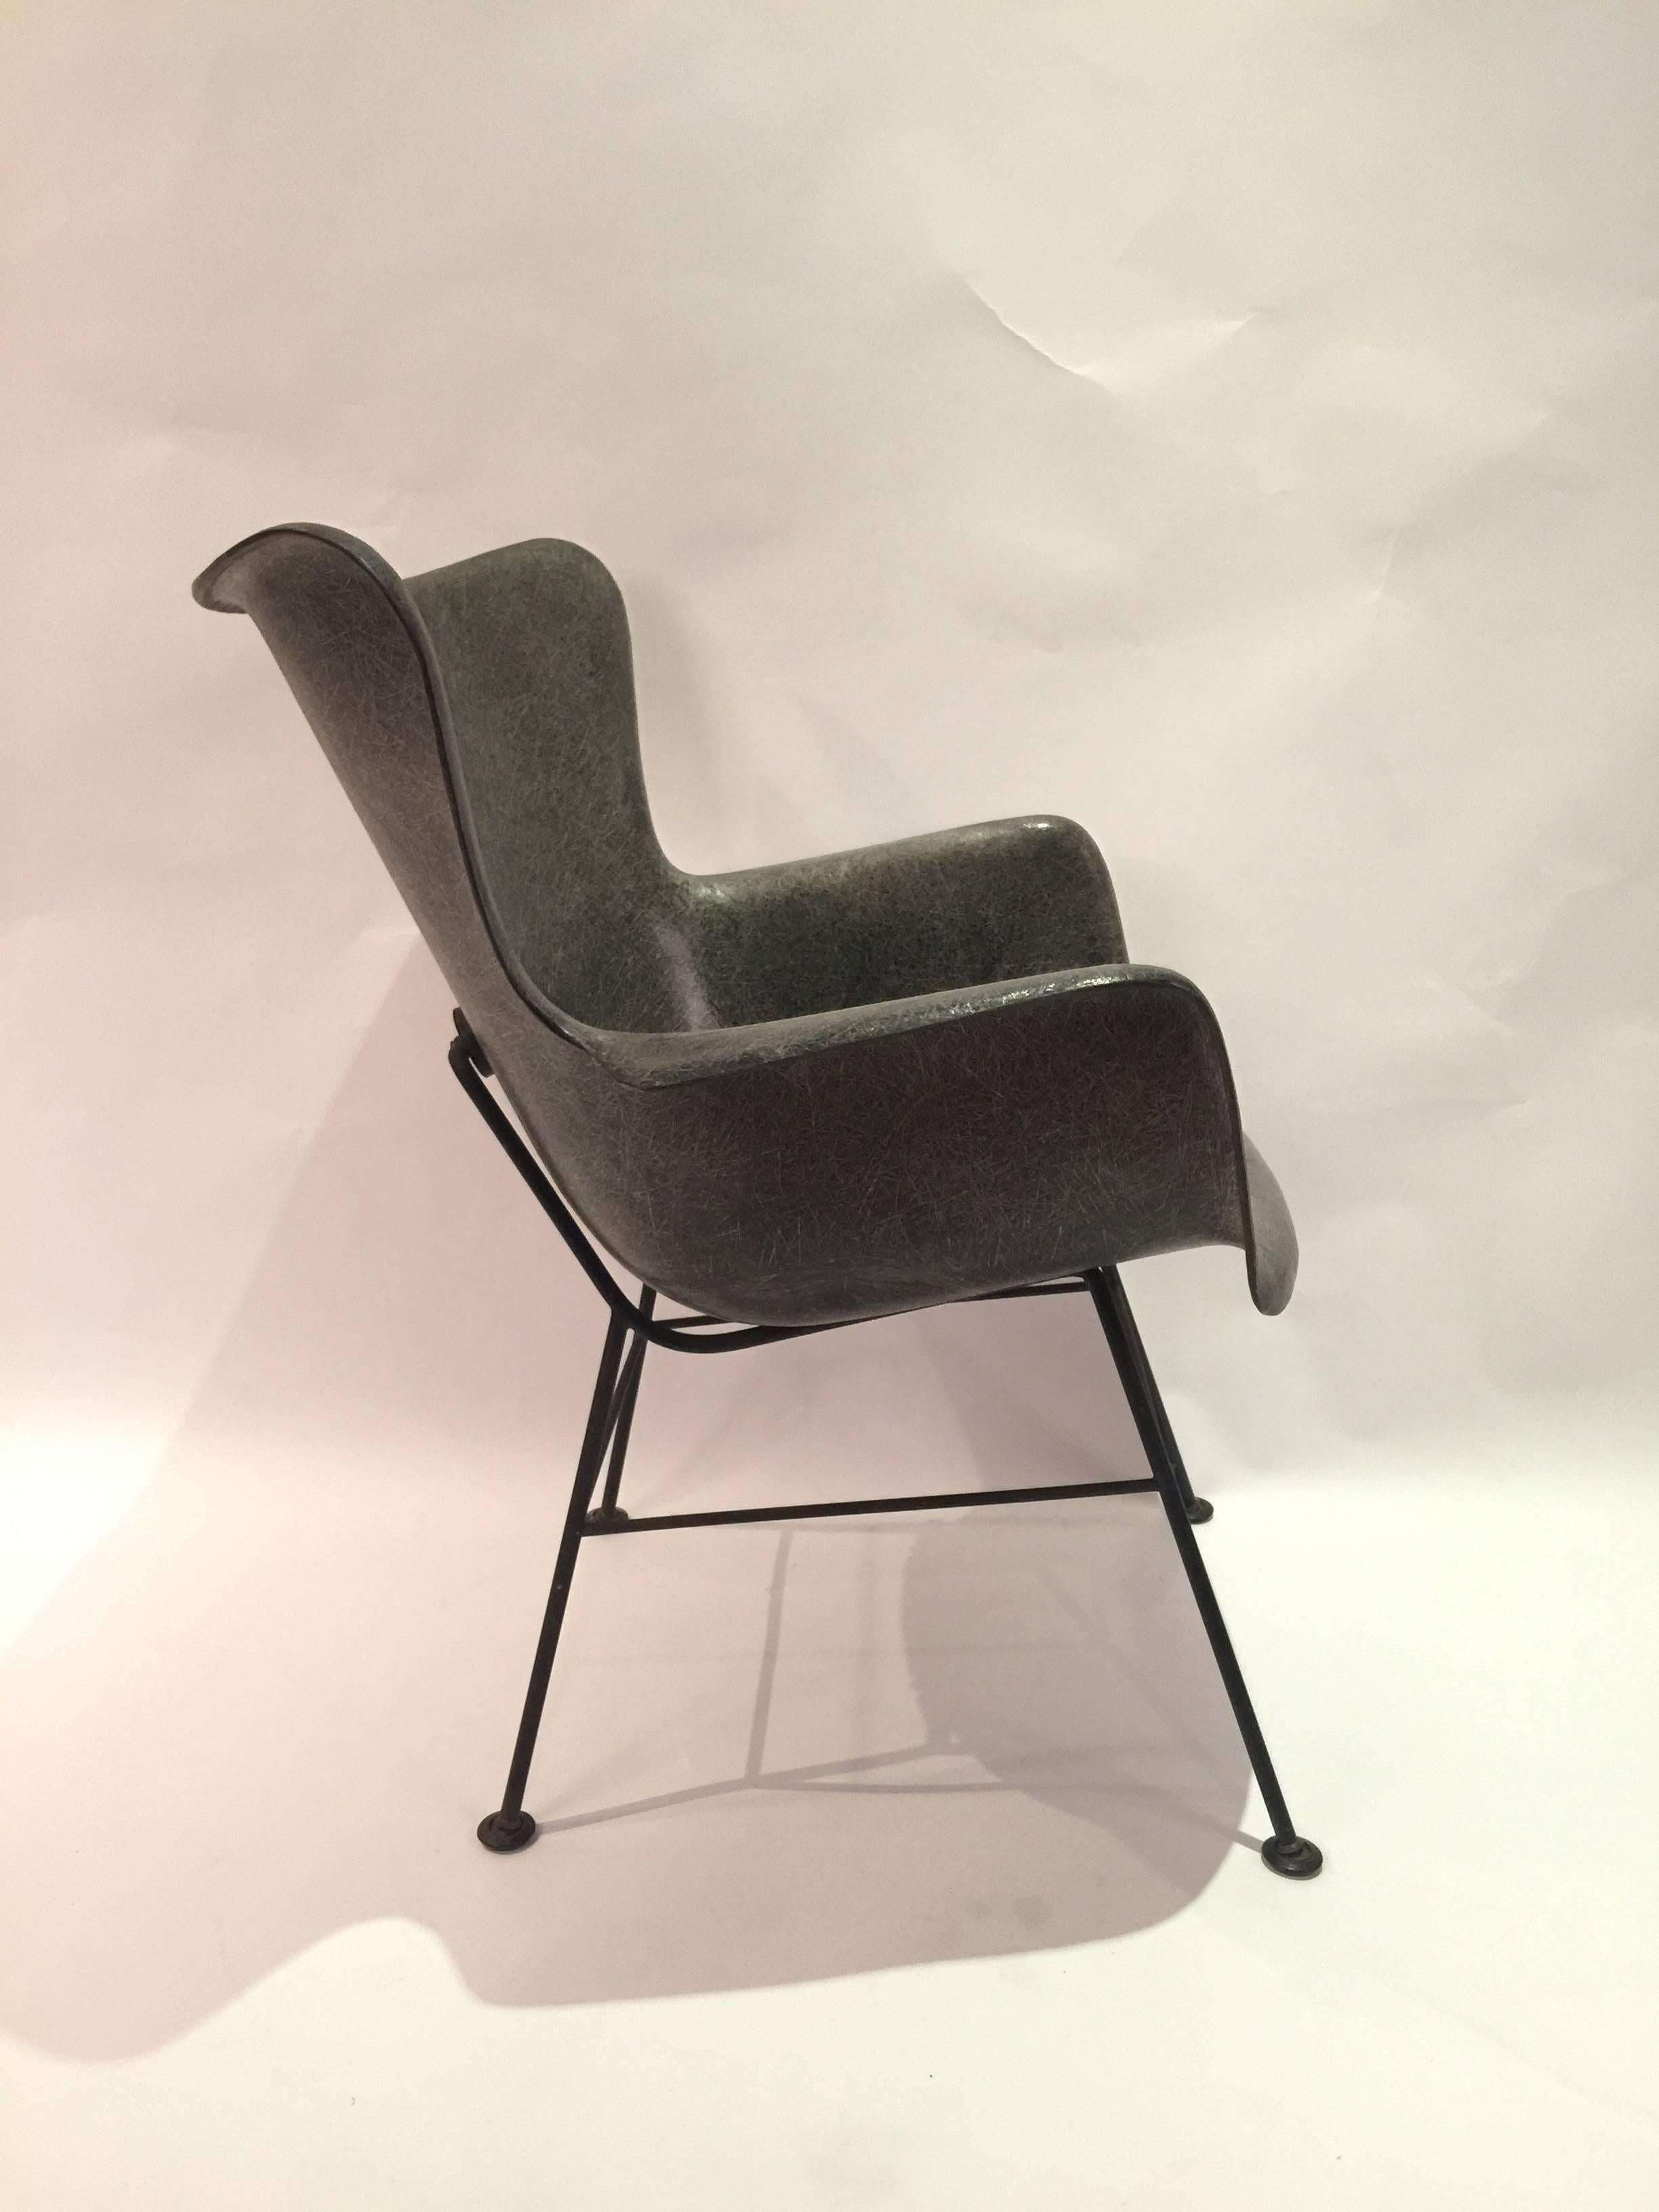 Graphite grey fiberglass wingback shell chair by Lawrence Peabody for Selig. An alternative to the Classic Eames fiberglass chair. Lovely surface nuance and patina. And wonderful pattern to the fiberglass. Has original foot glides and shock